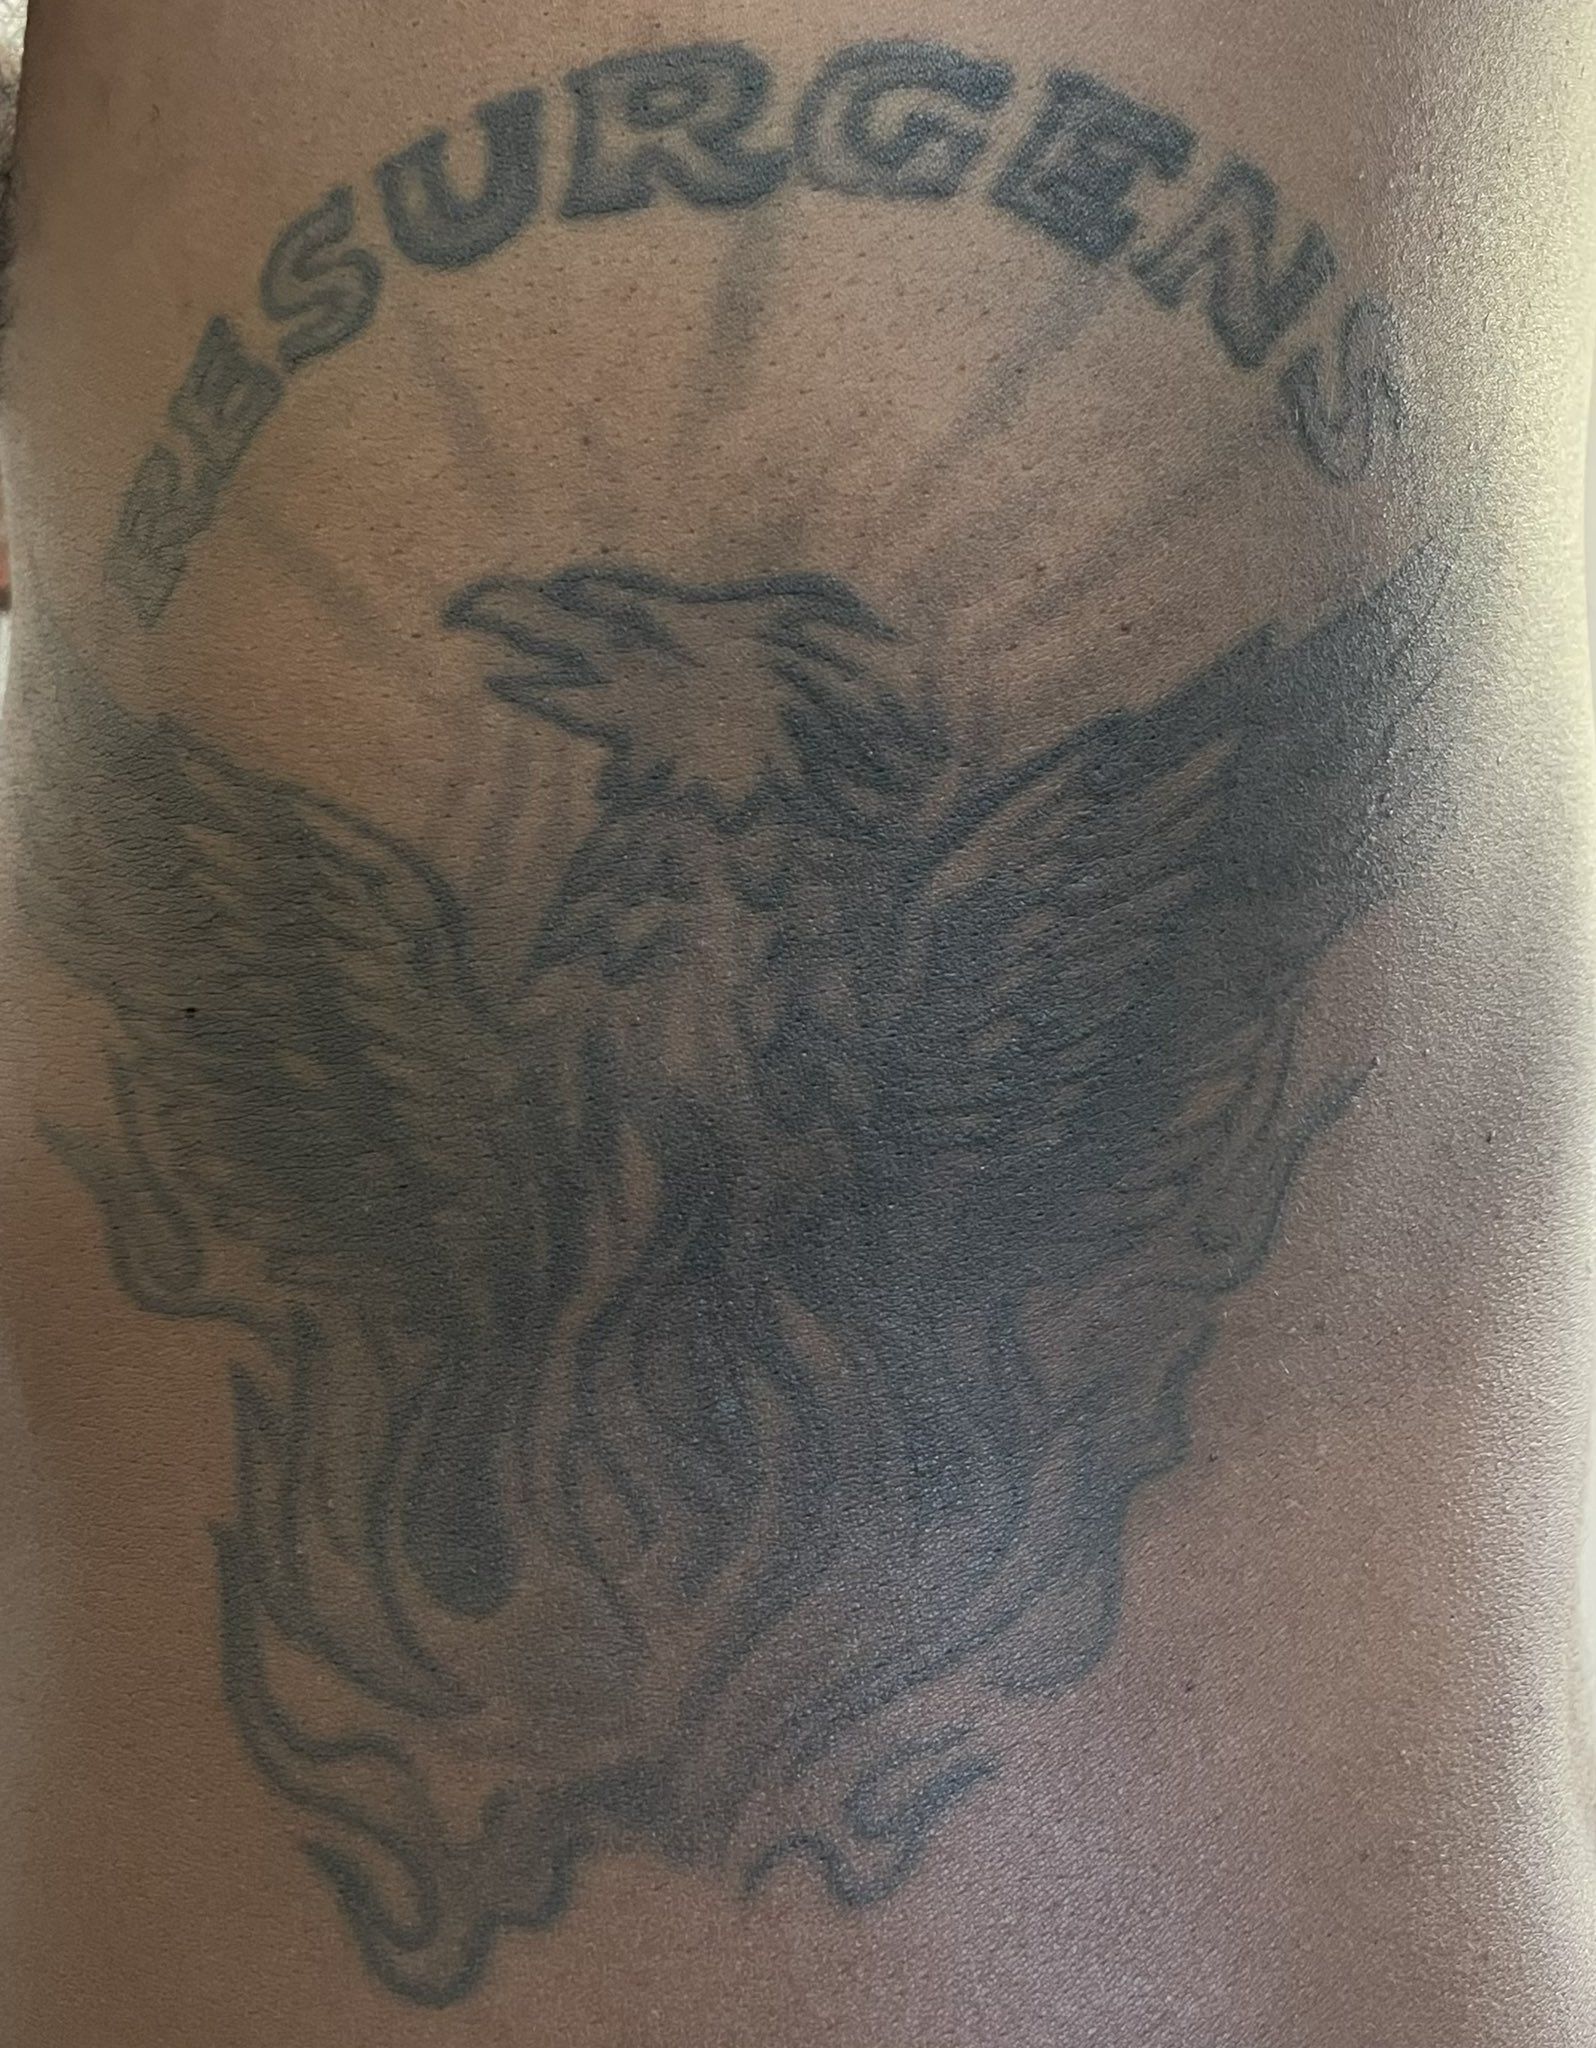 A tattoo of the Atlanta logo featuring a phoenix and the word Resurgens